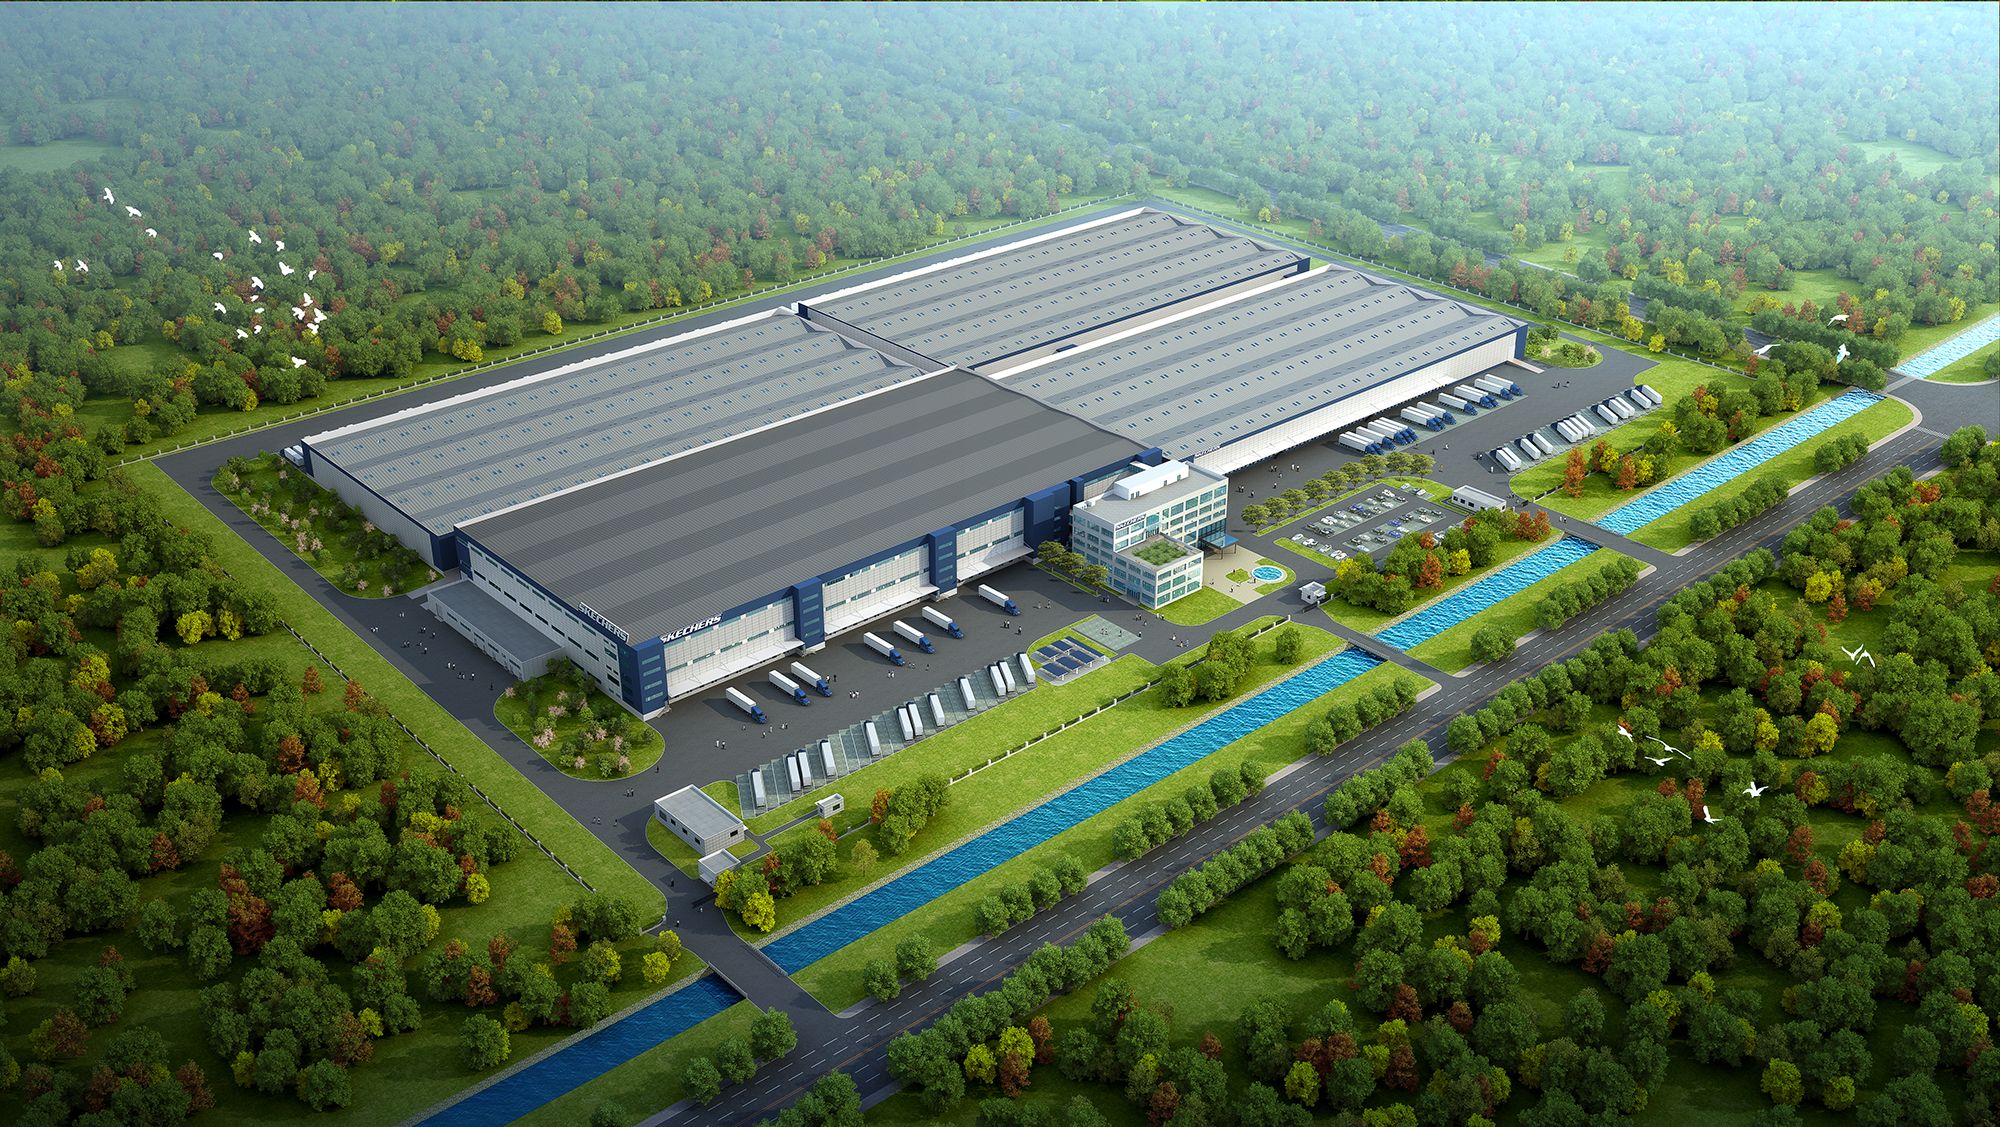 Highly automated logistics center for 